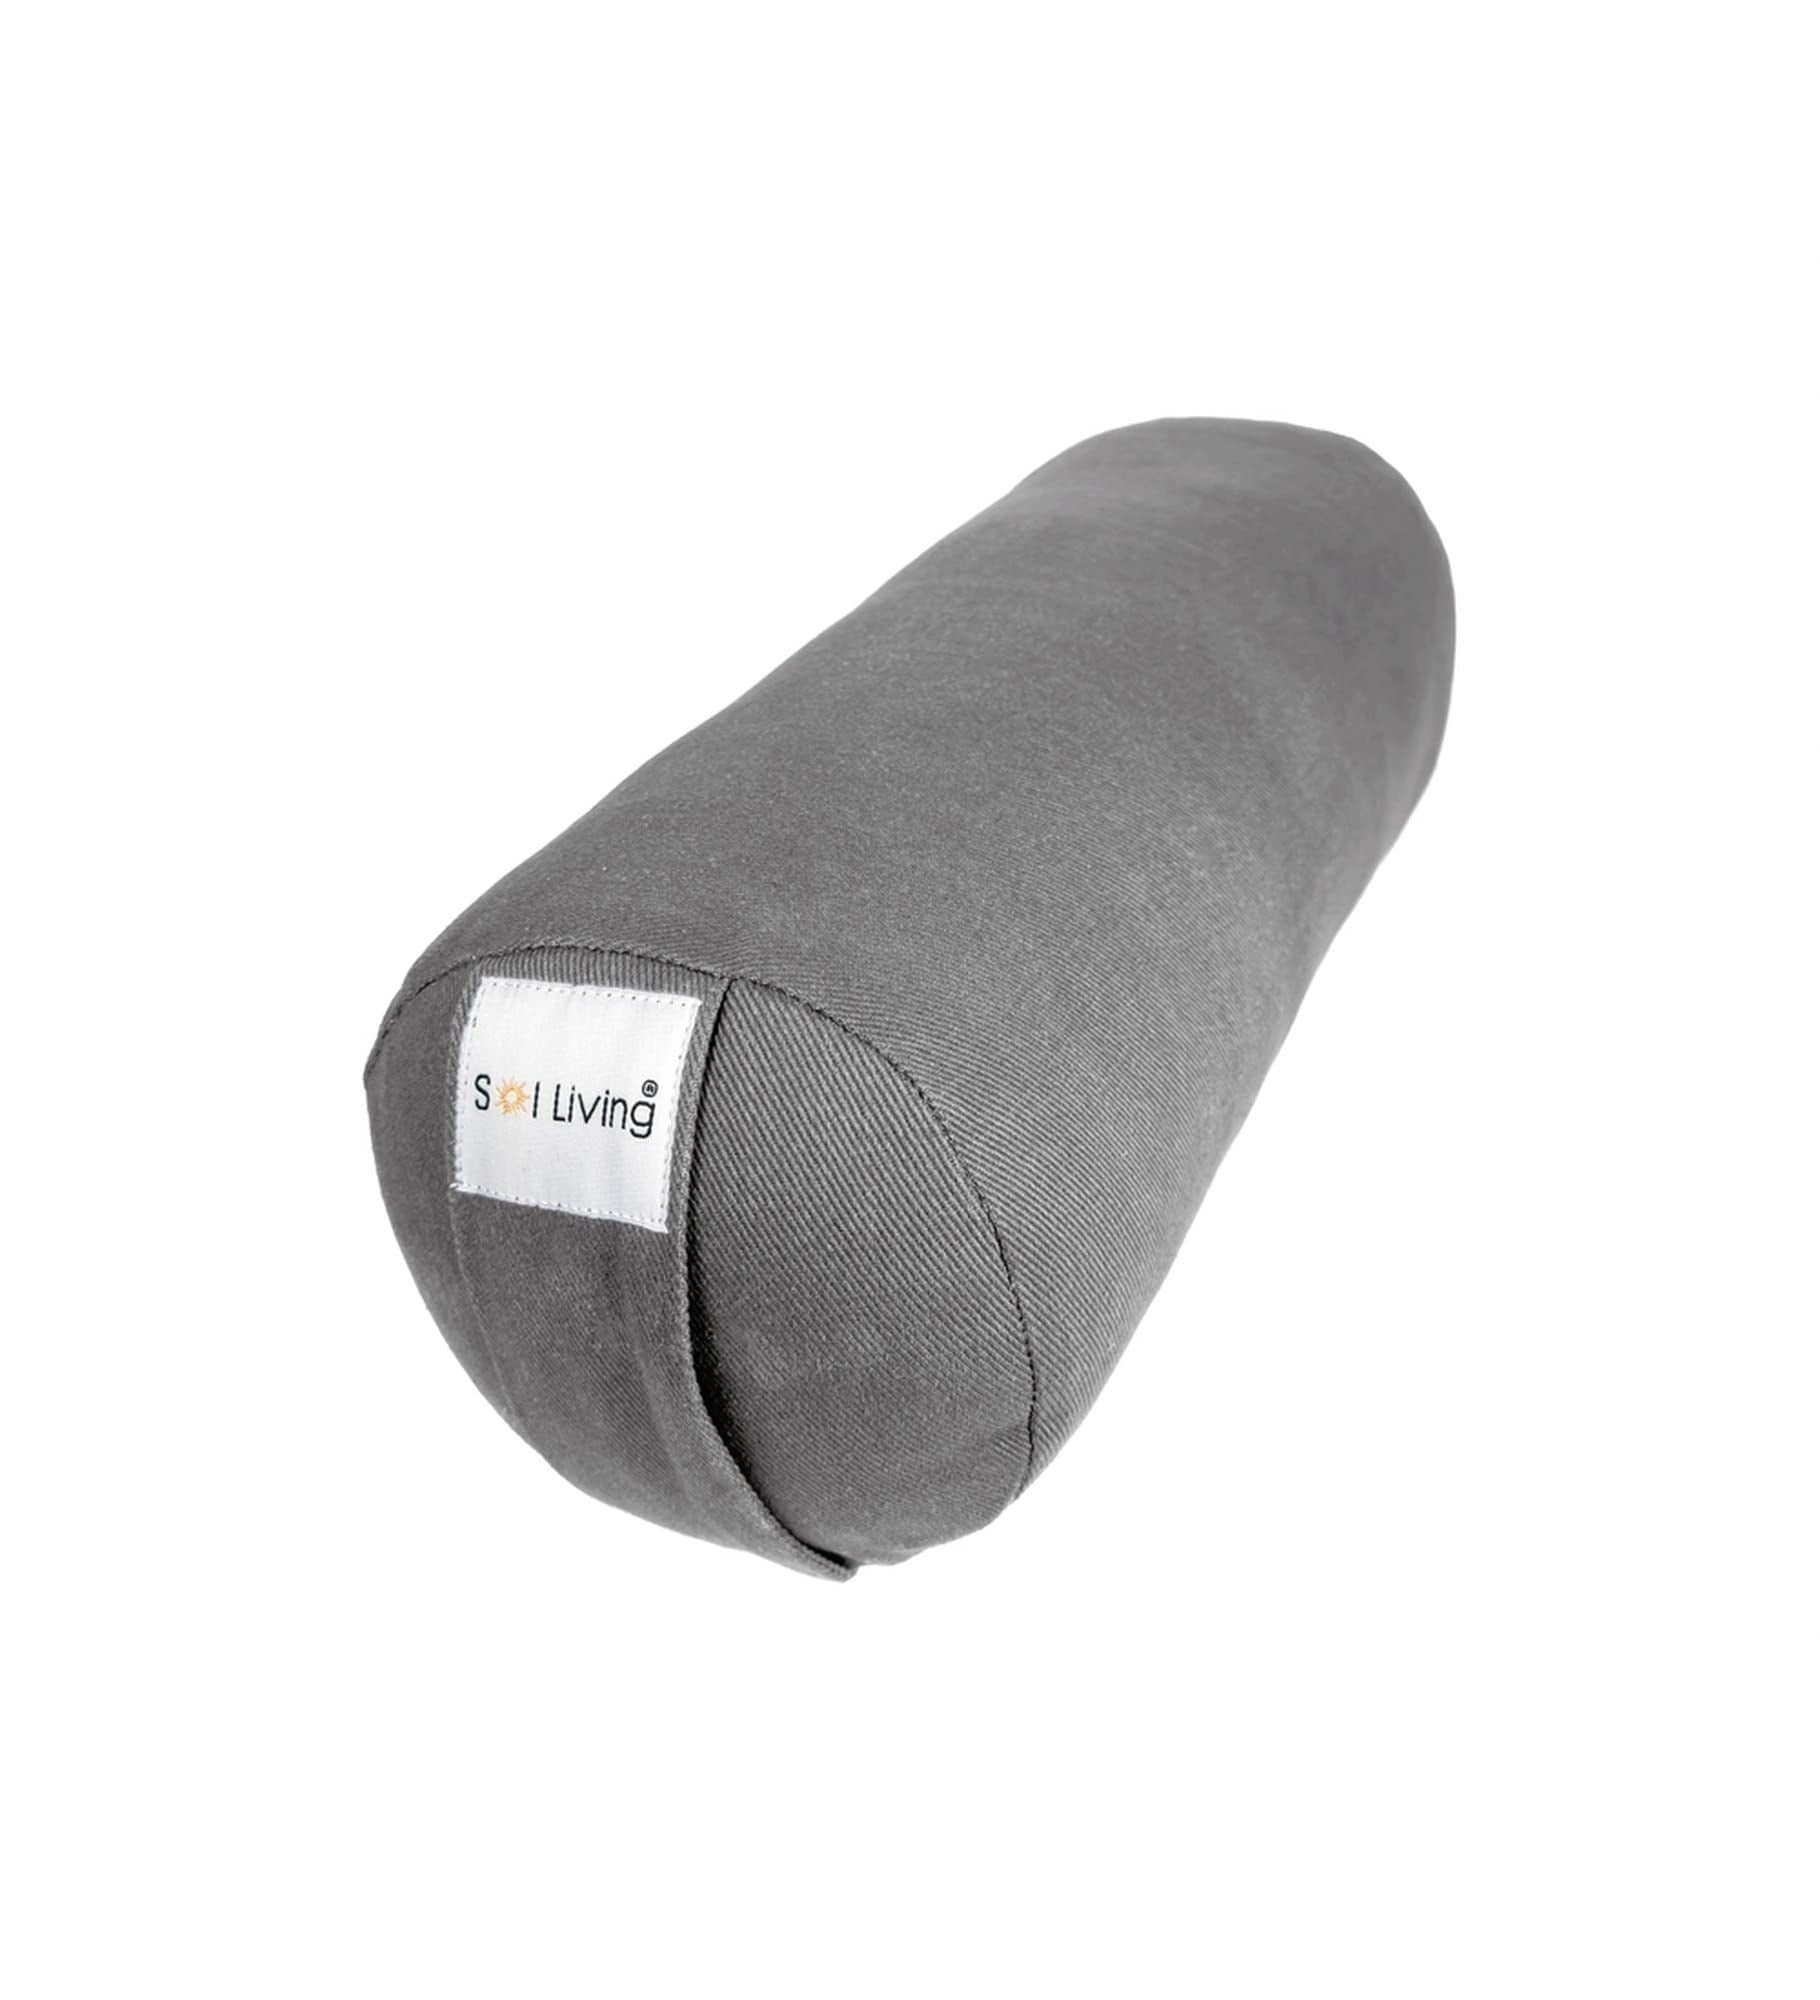 Professional Yoga Bolster with Carry Handle Pillow for Legs Restorative Yoga ,Yoga Accessories Supplies Equipment - AliExpress